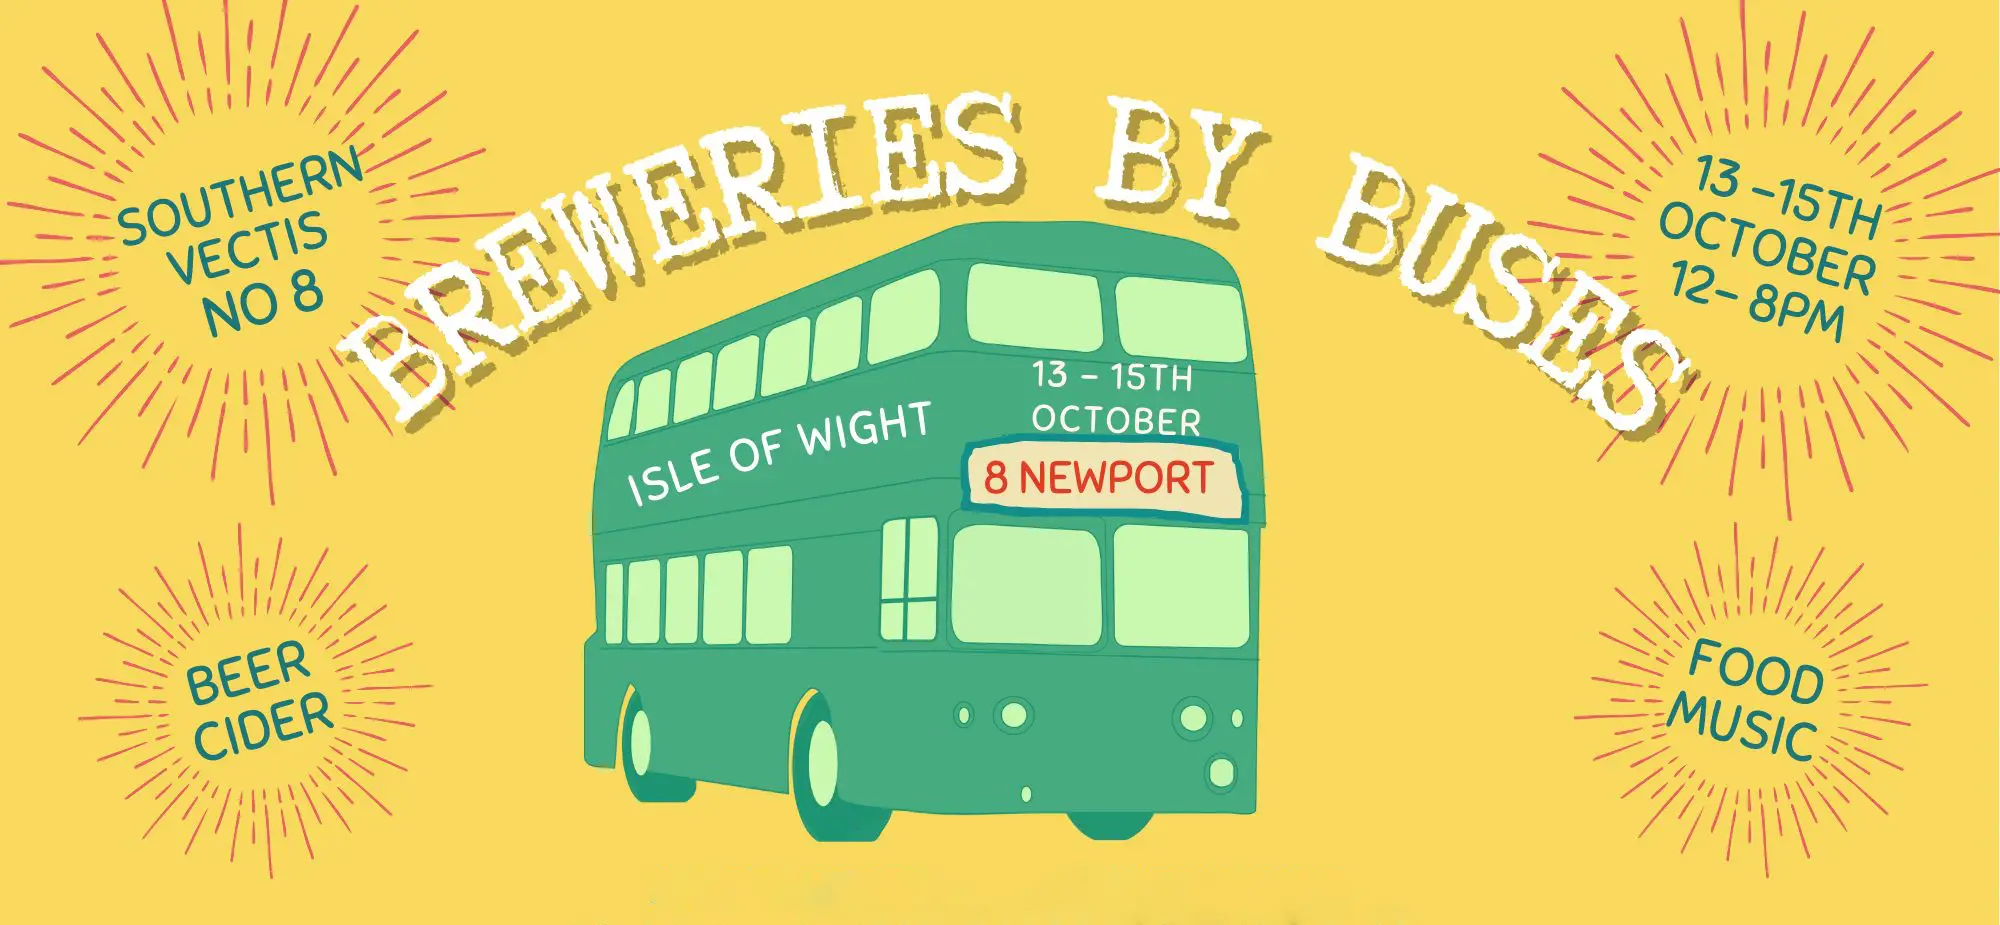 Breweries by Bus poster